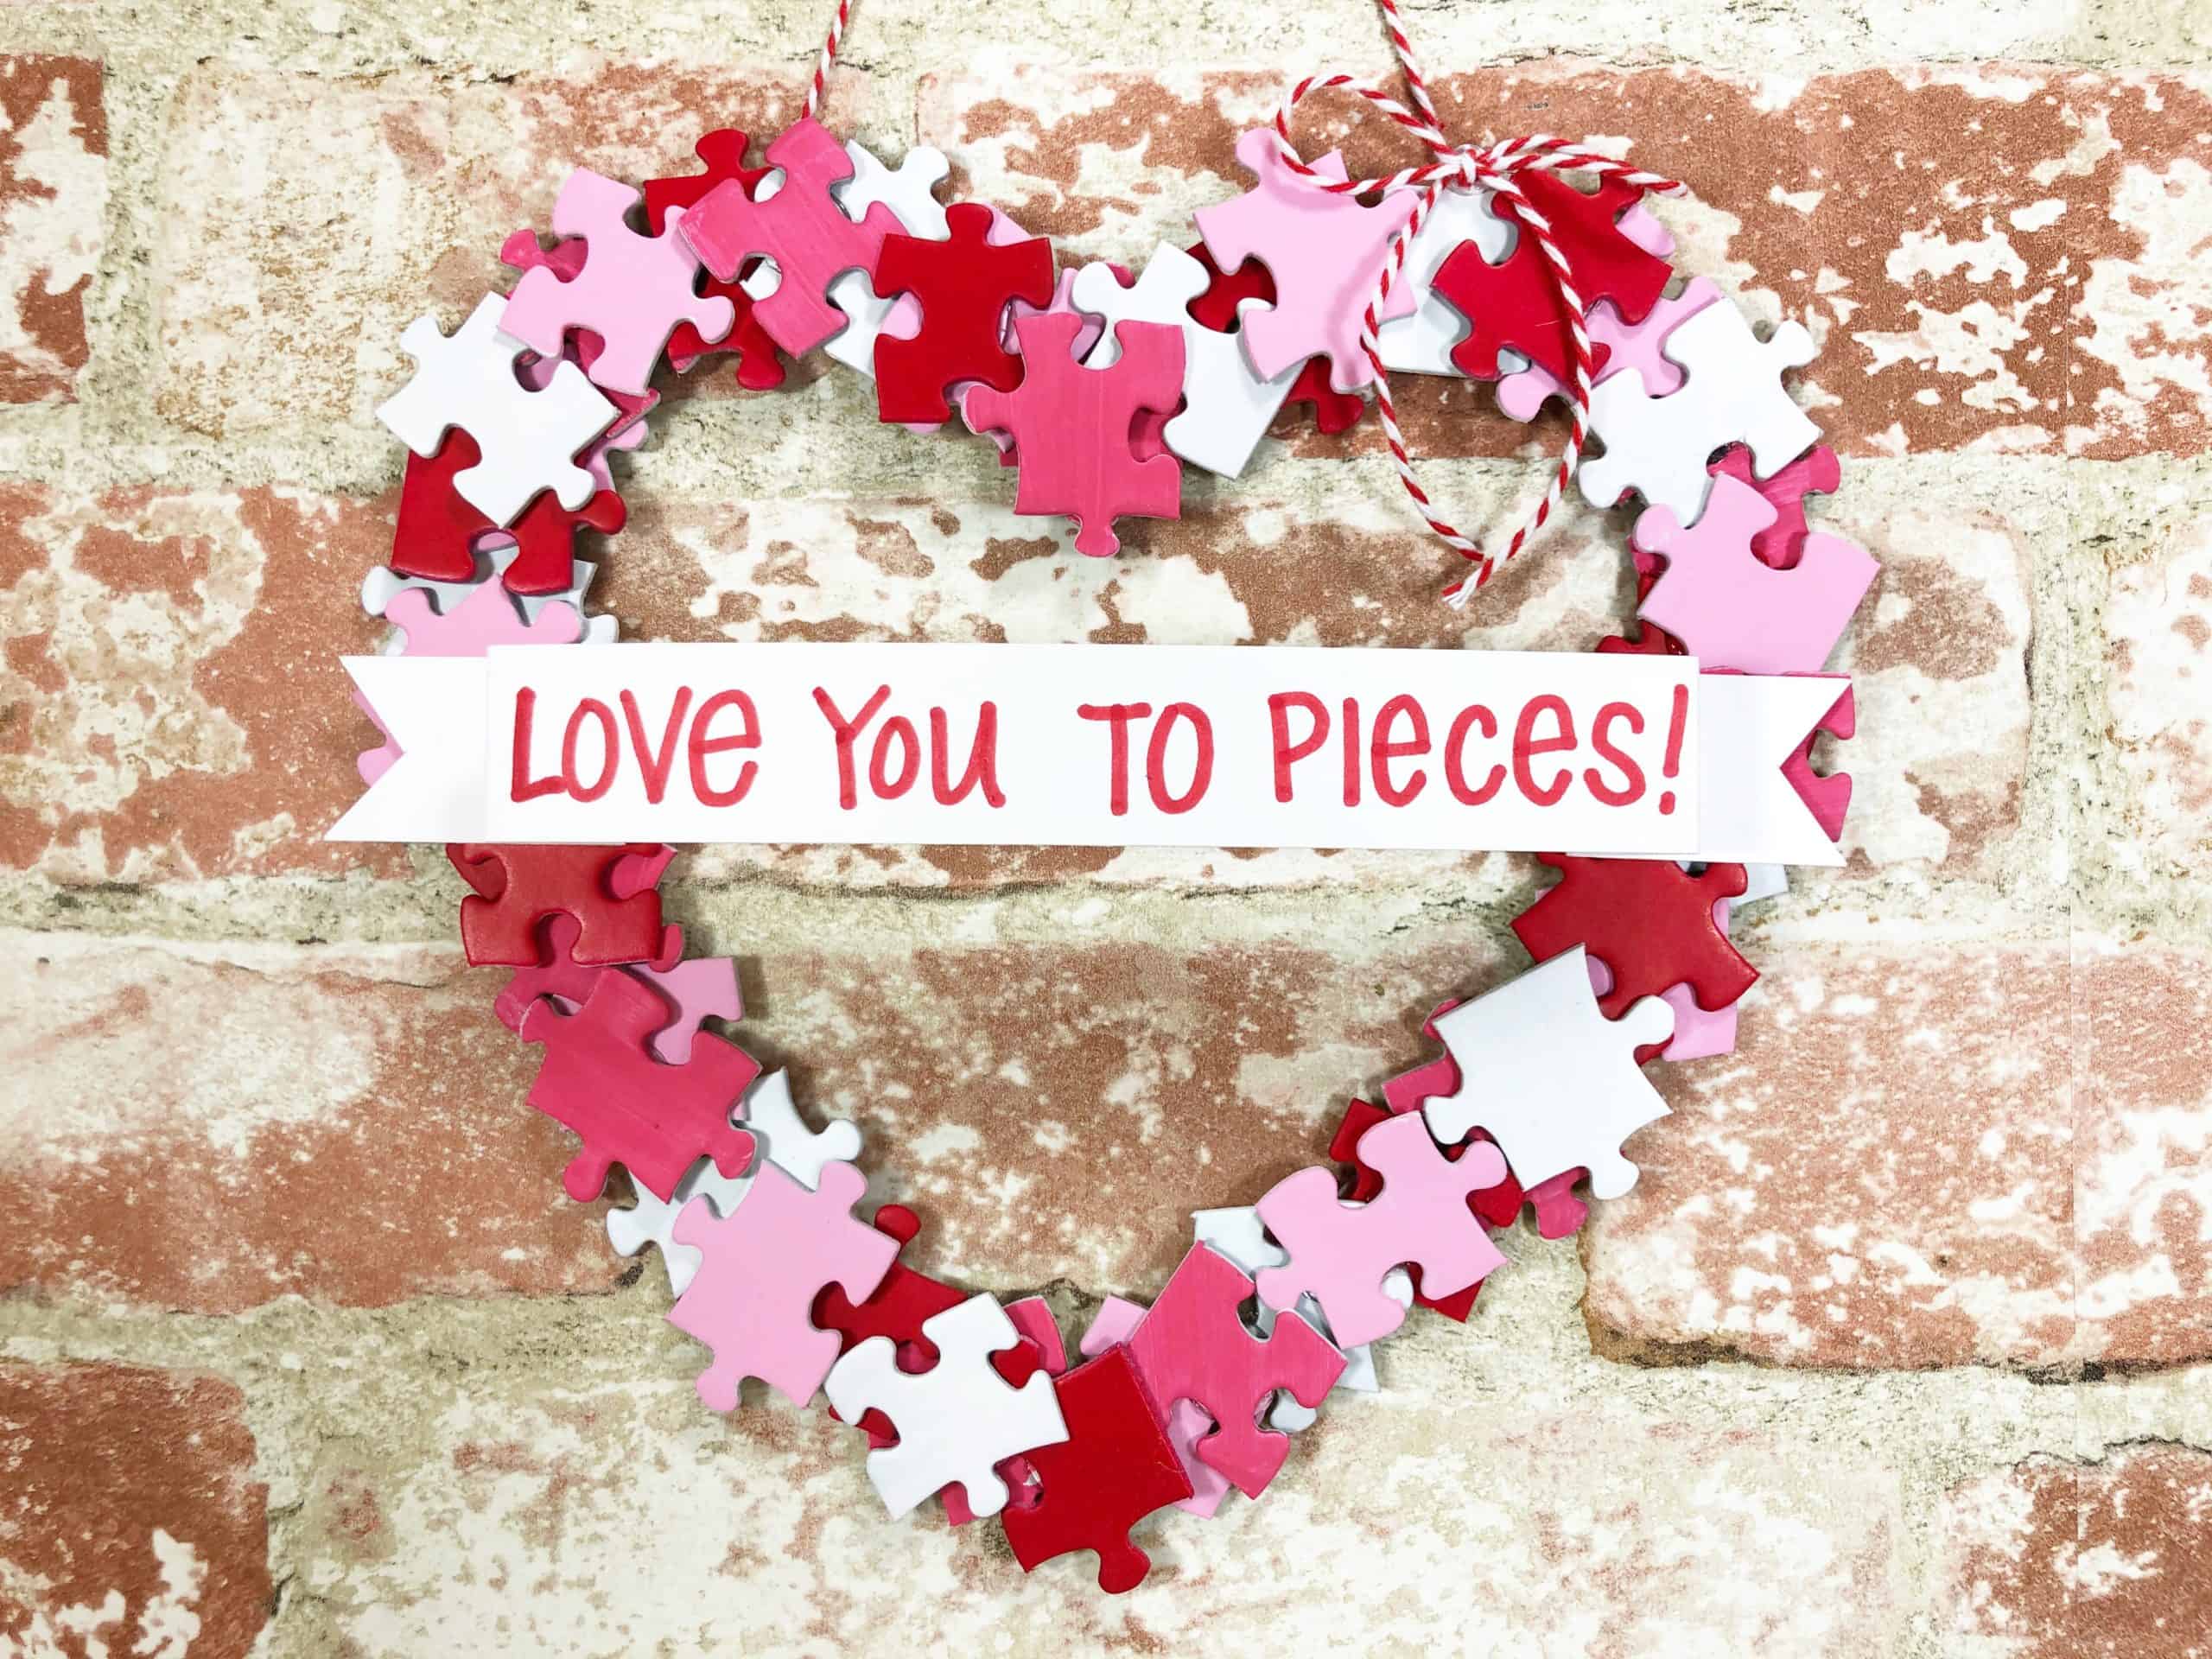 Fun DIY: How to make a heart wreath with puzzle pieces